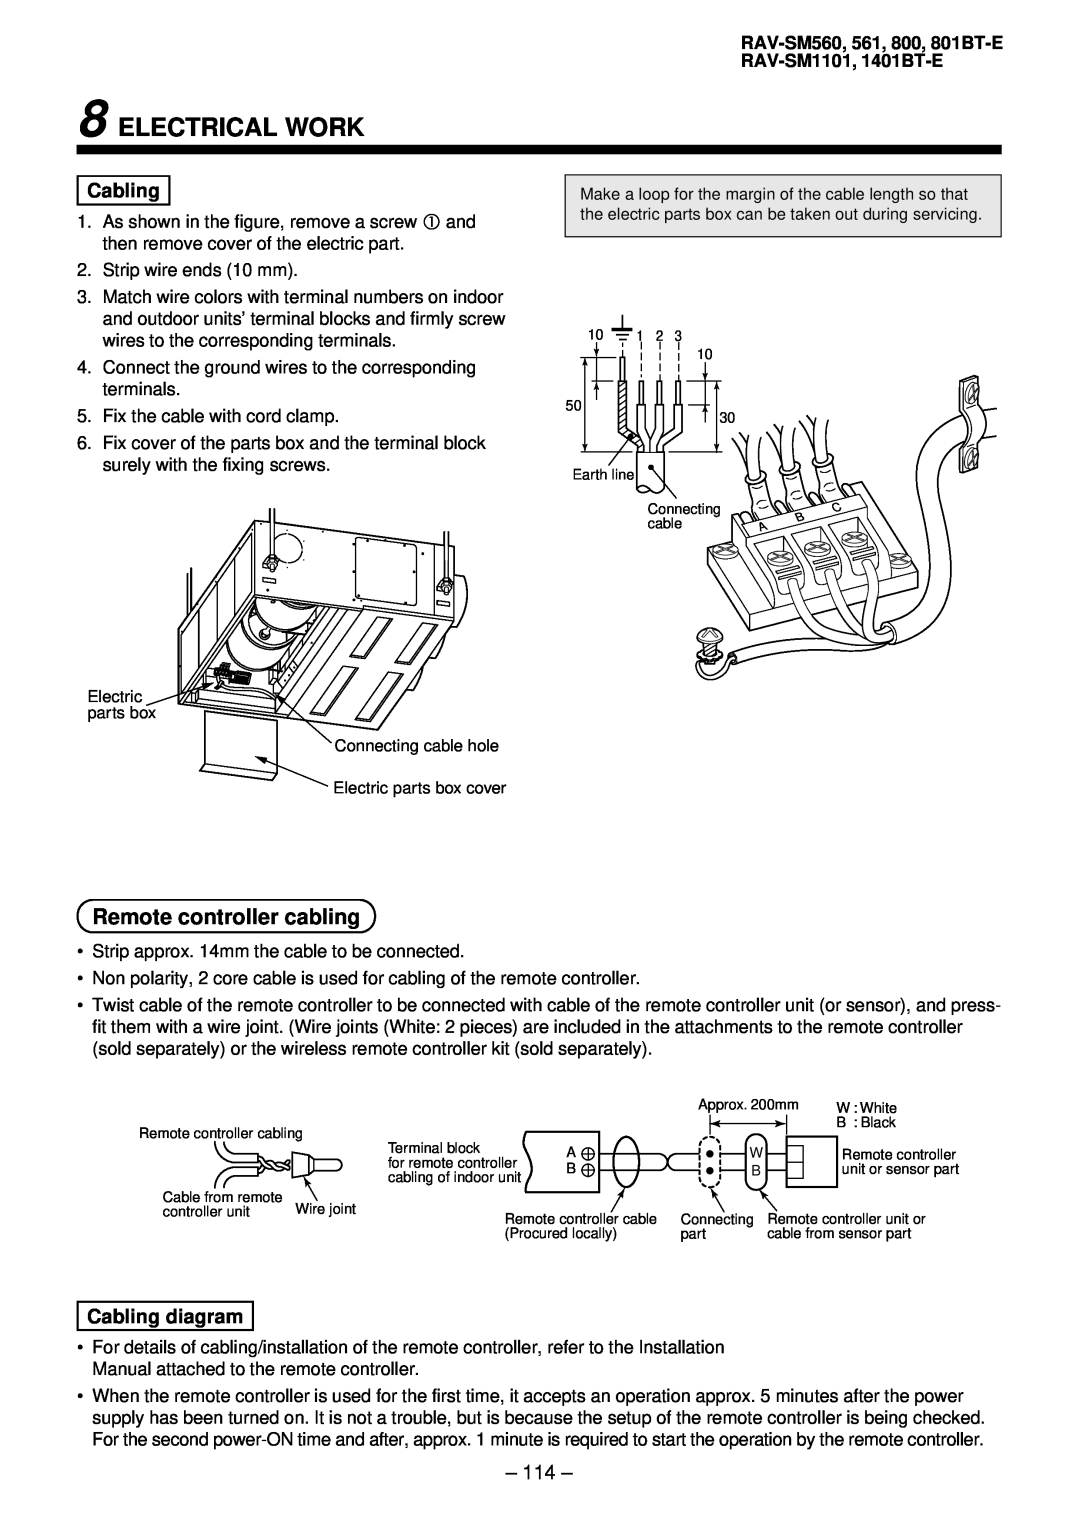 Balcar R410A service manual Electrical Work, Remote controller cabling, Cabling diagram, 114 